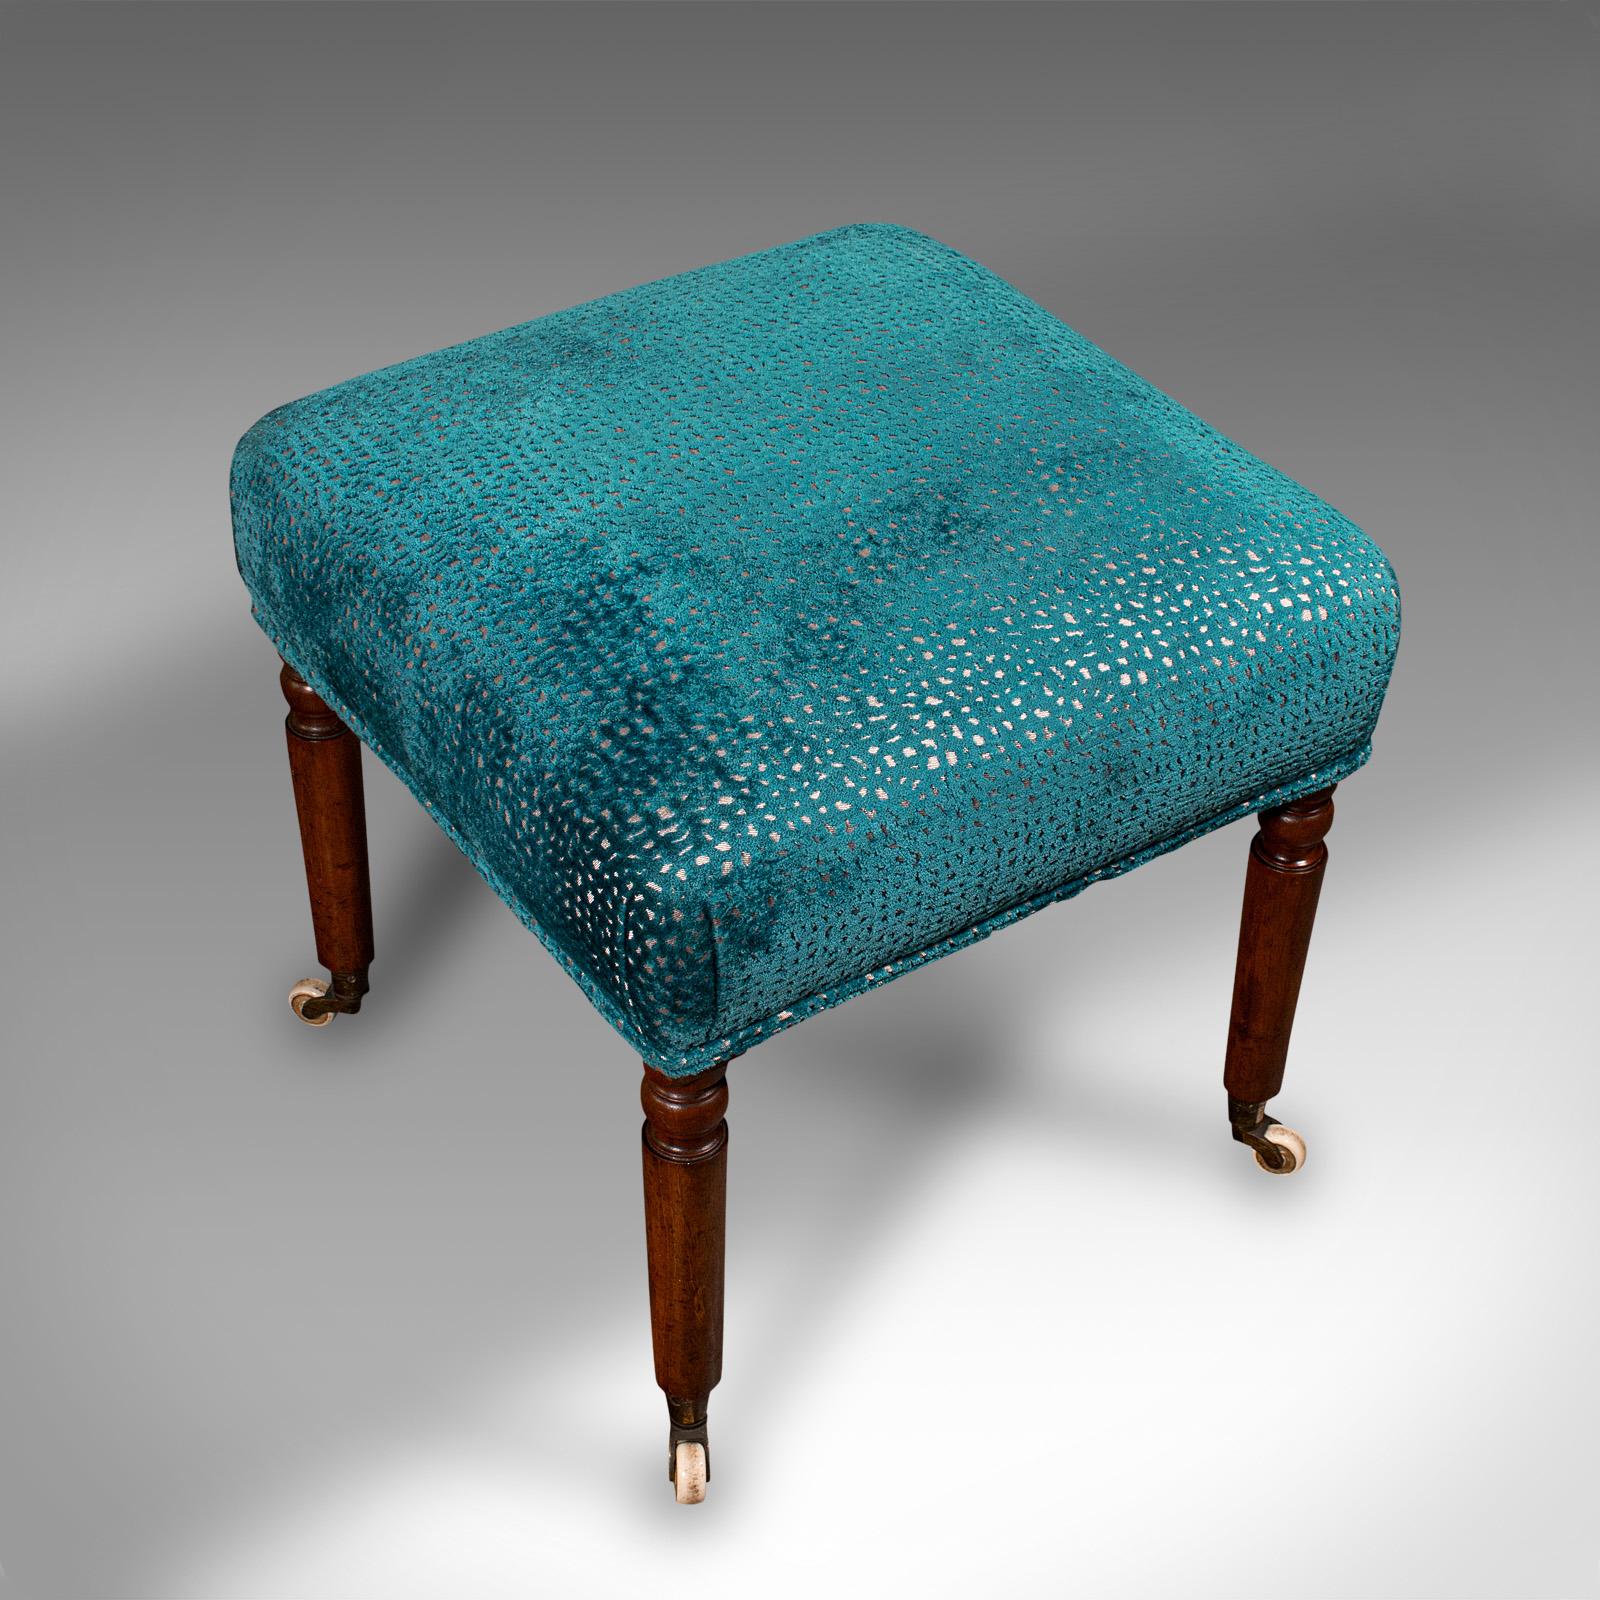 Antique Dressing Stool, English, Chenille Upholstery, Footstool, Regency, C.1820 For Sale 1